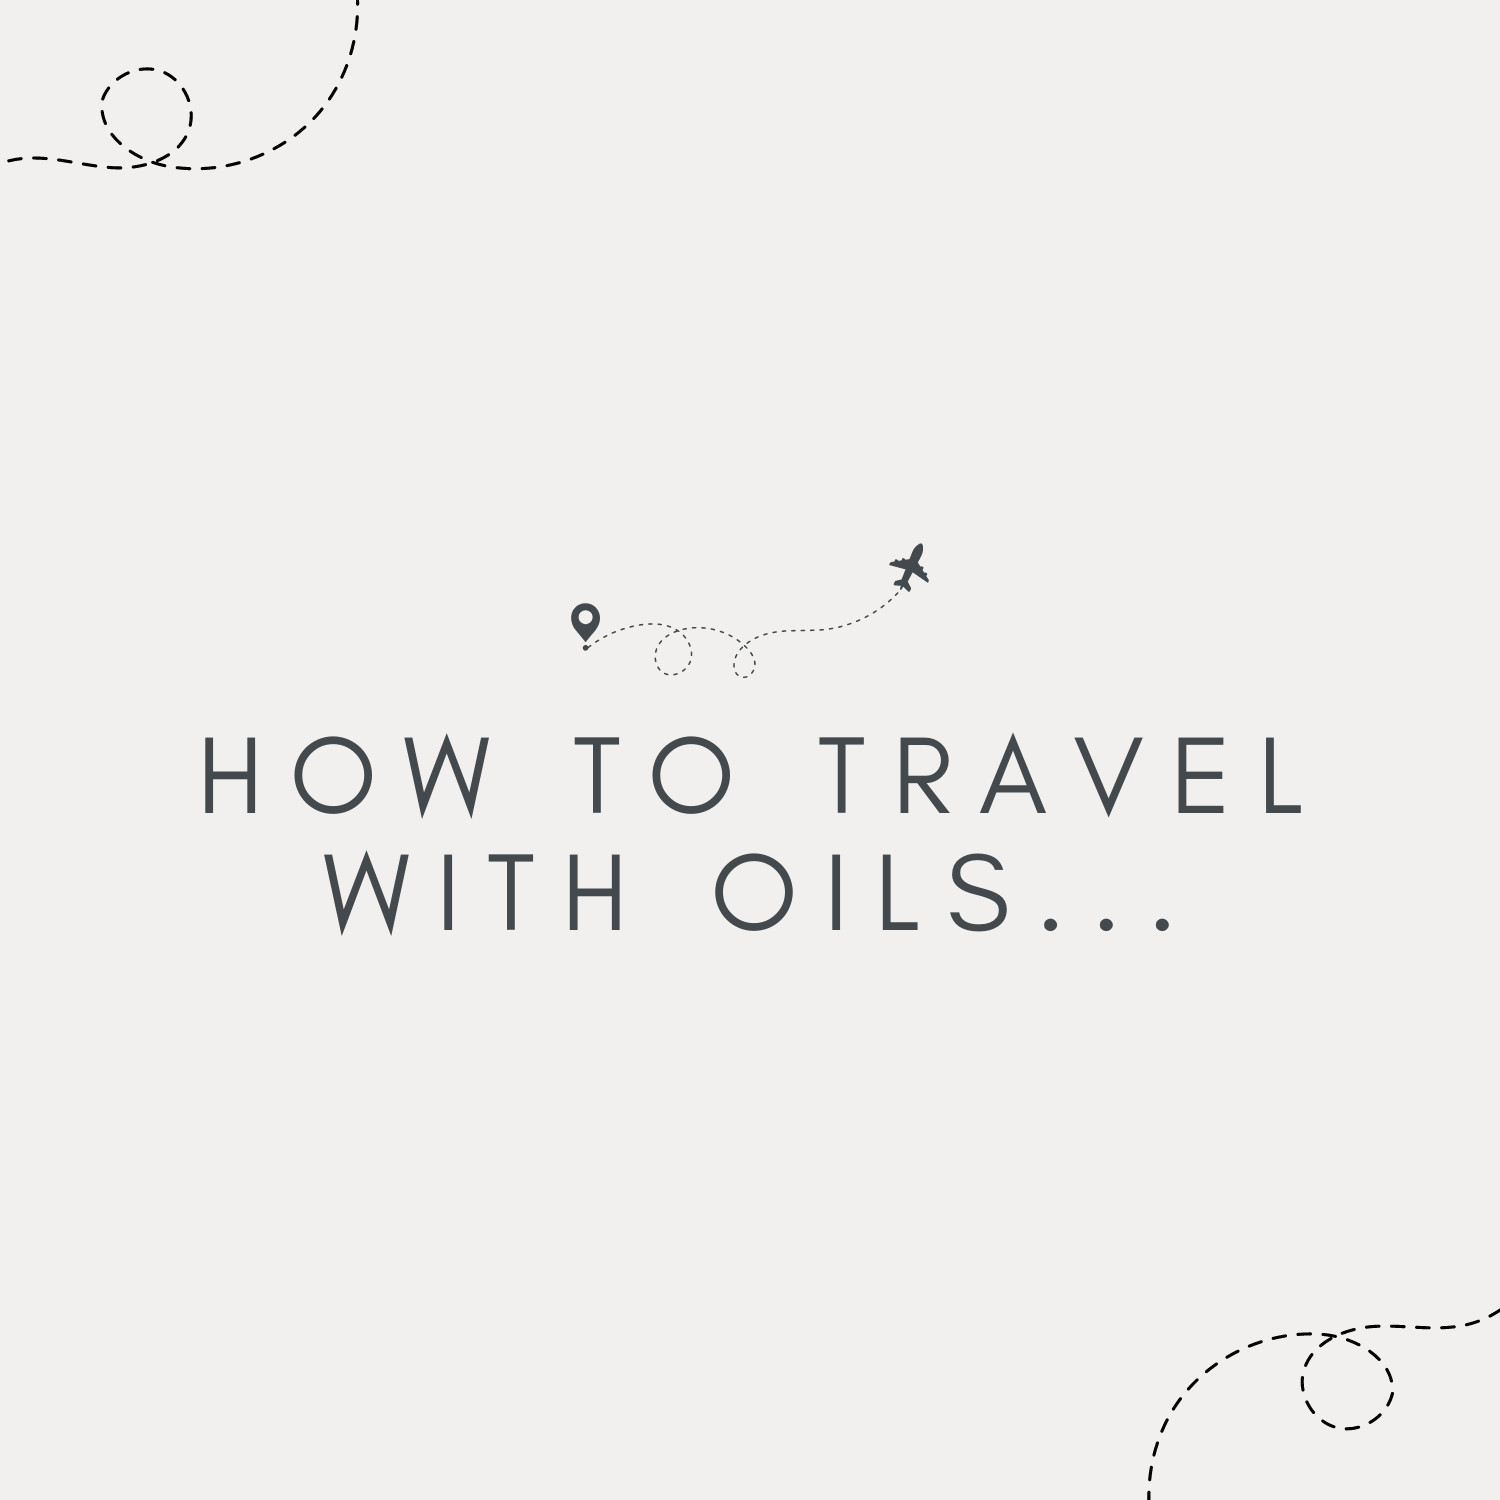 How to travel with oils